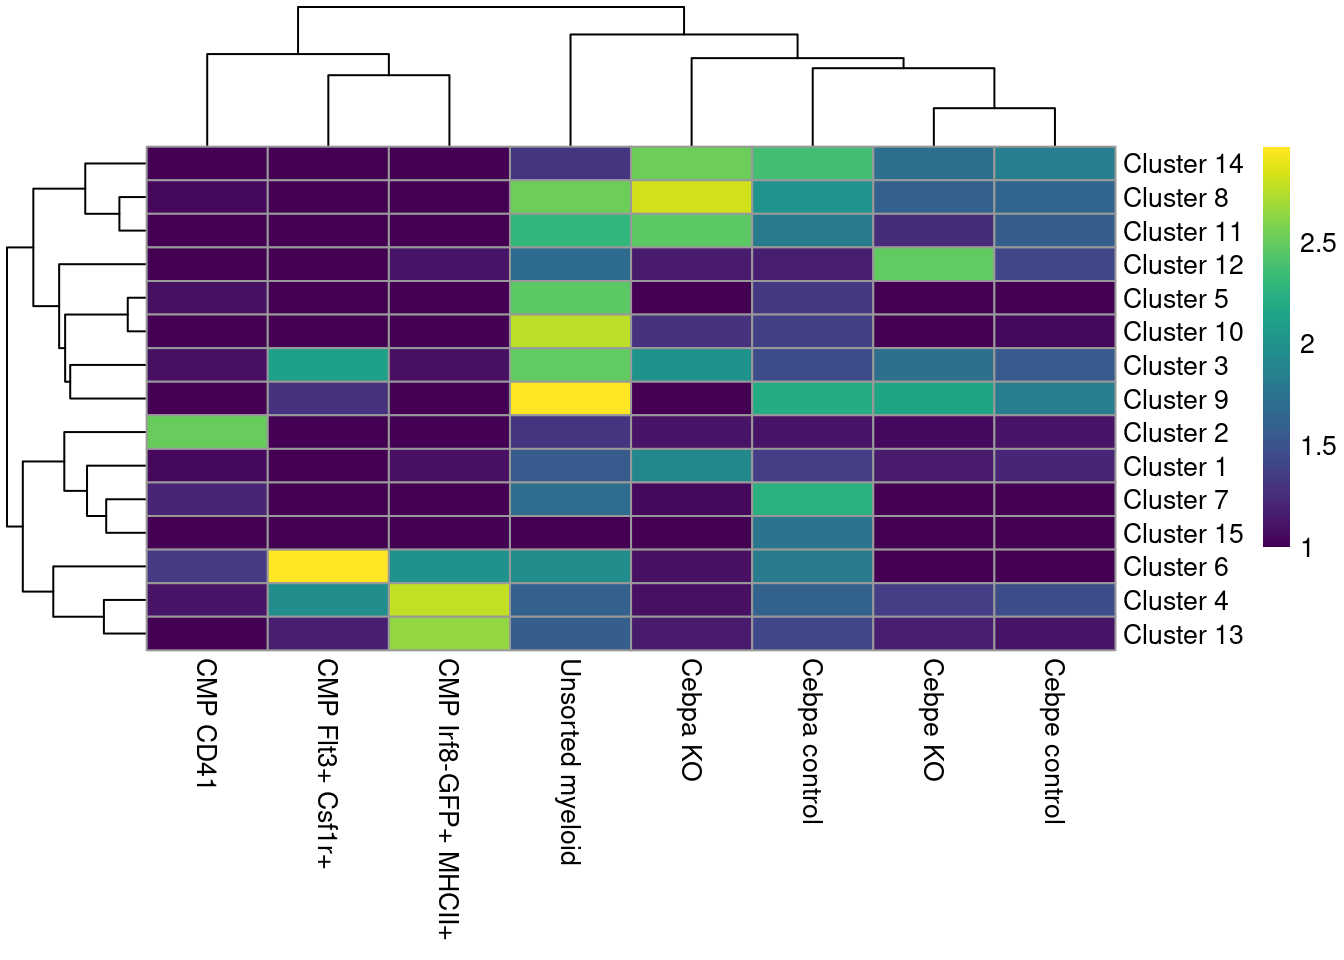 Heatmap of the distribution of cells across clusters (rows) for each experimental treatment (column).